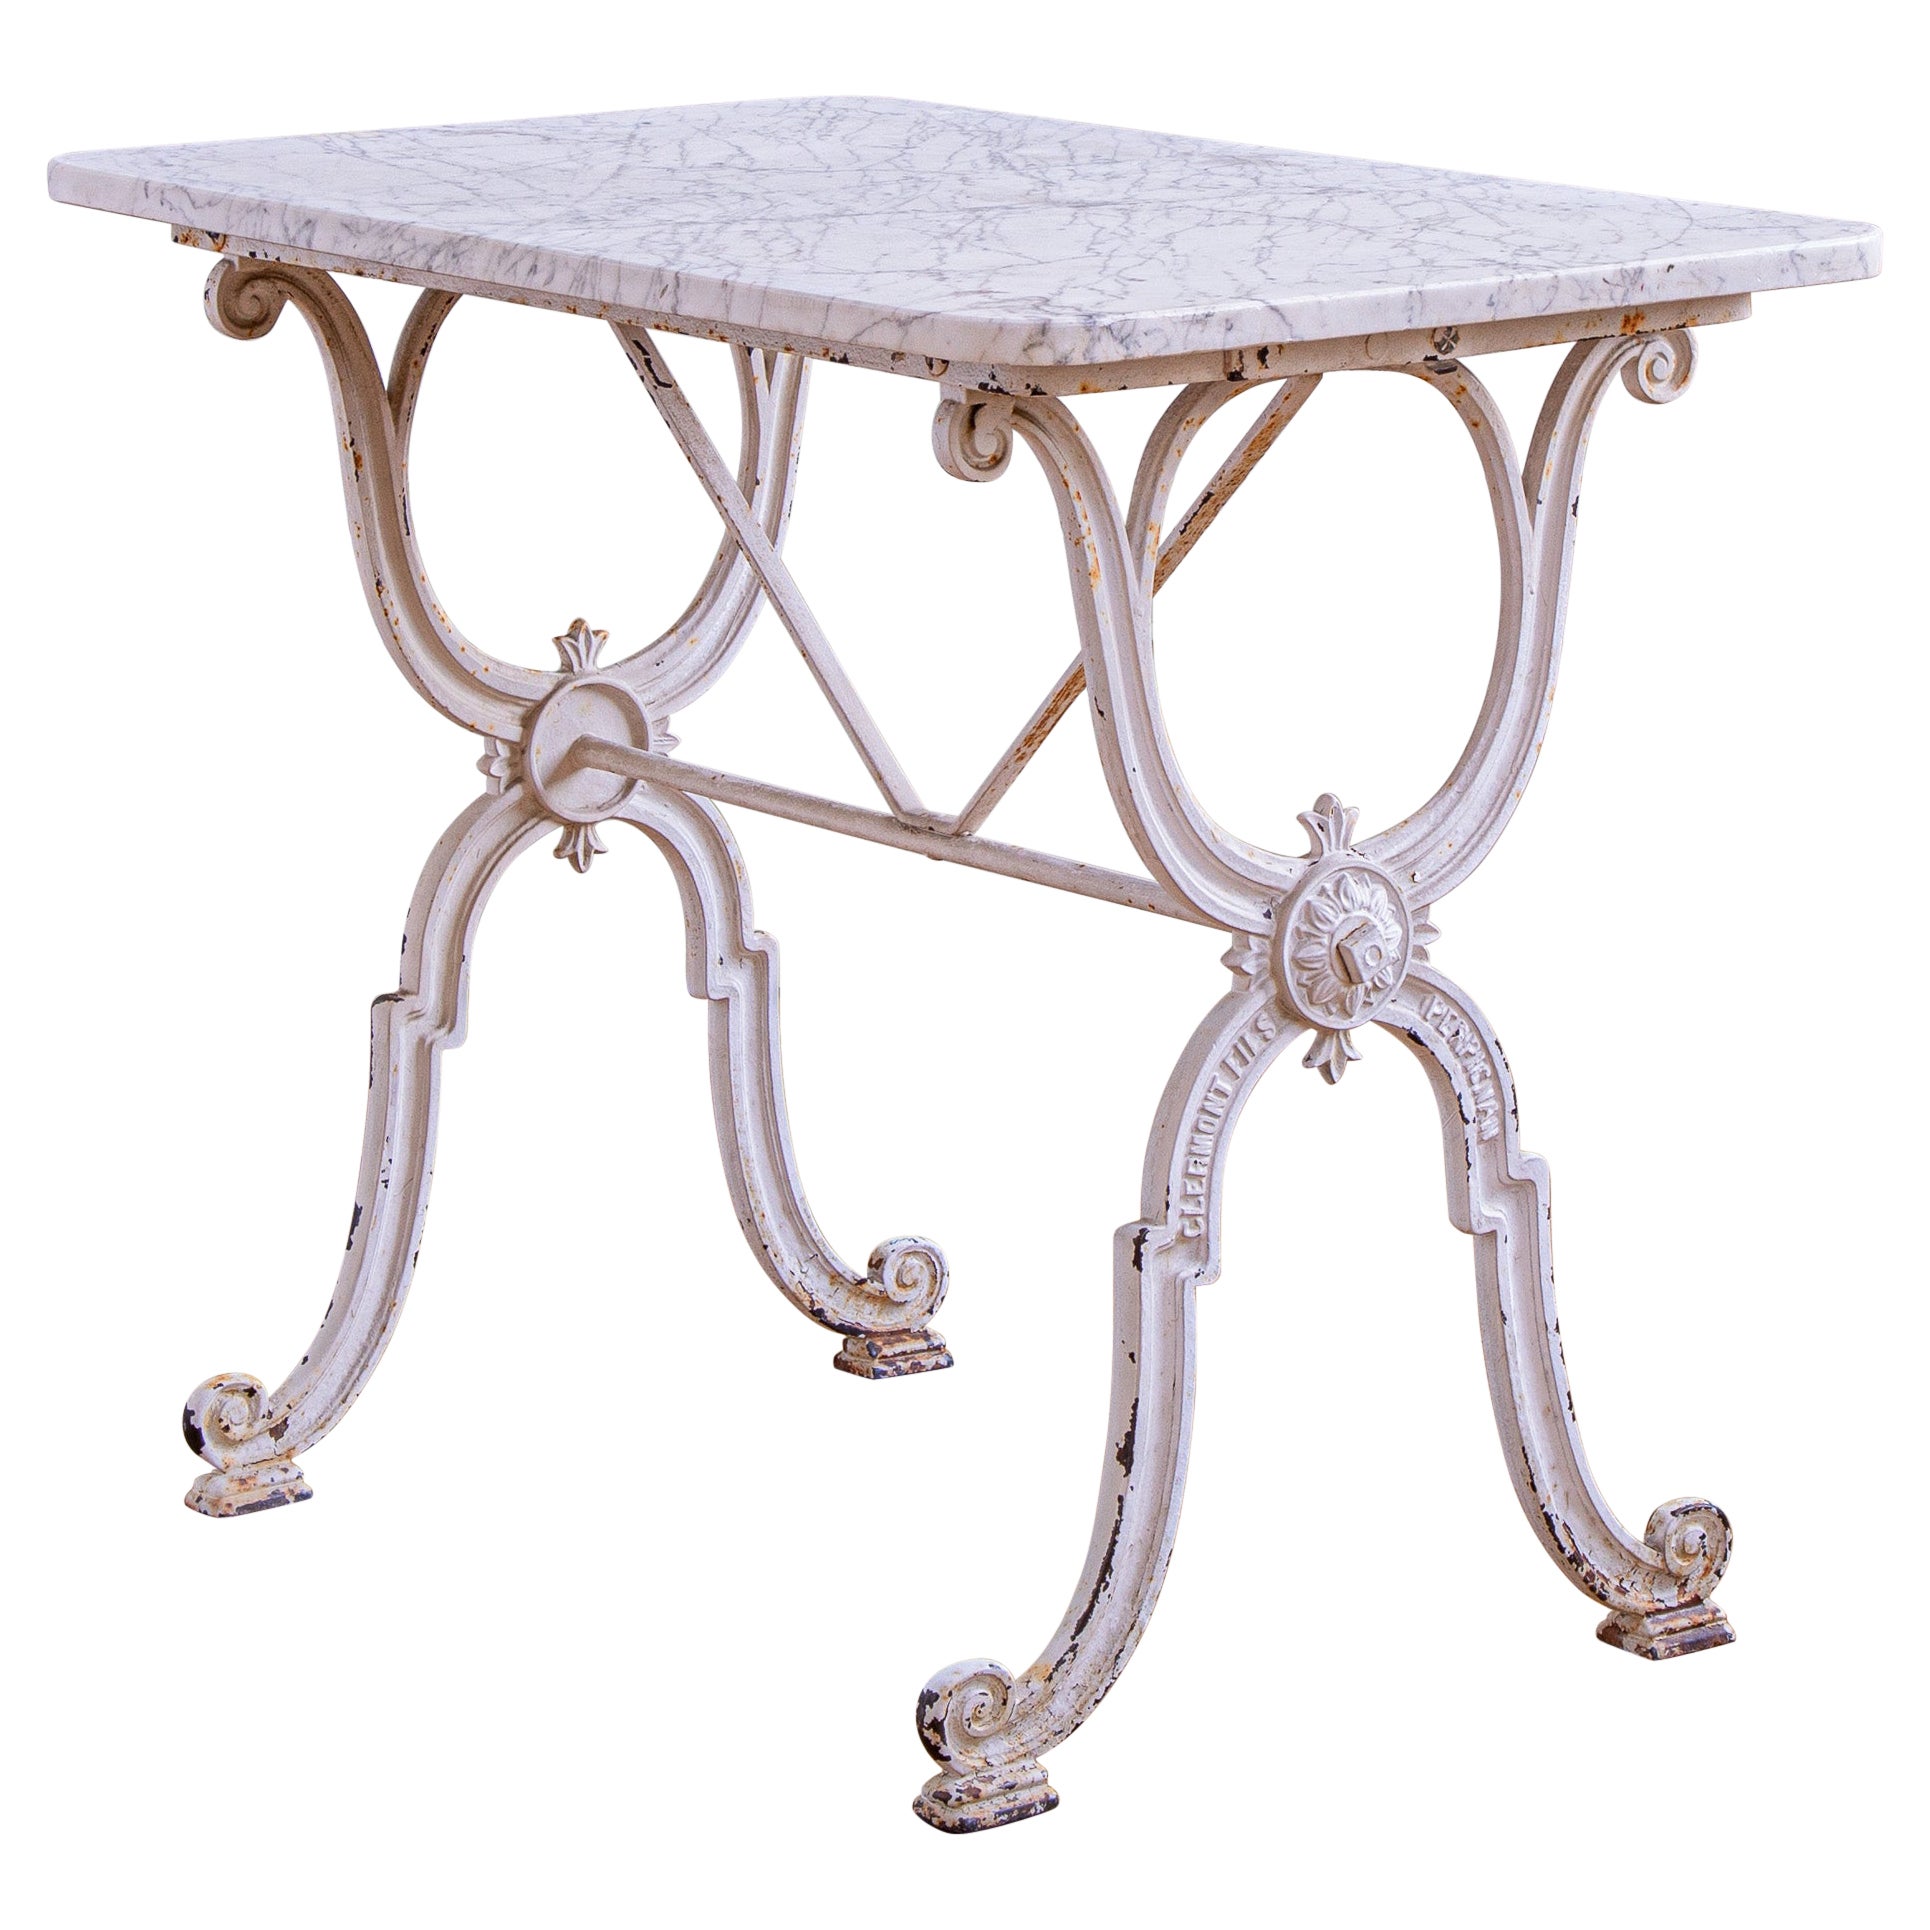 French Antique Iron & Marble Bistro / Garden Table In White By Clermont Fils